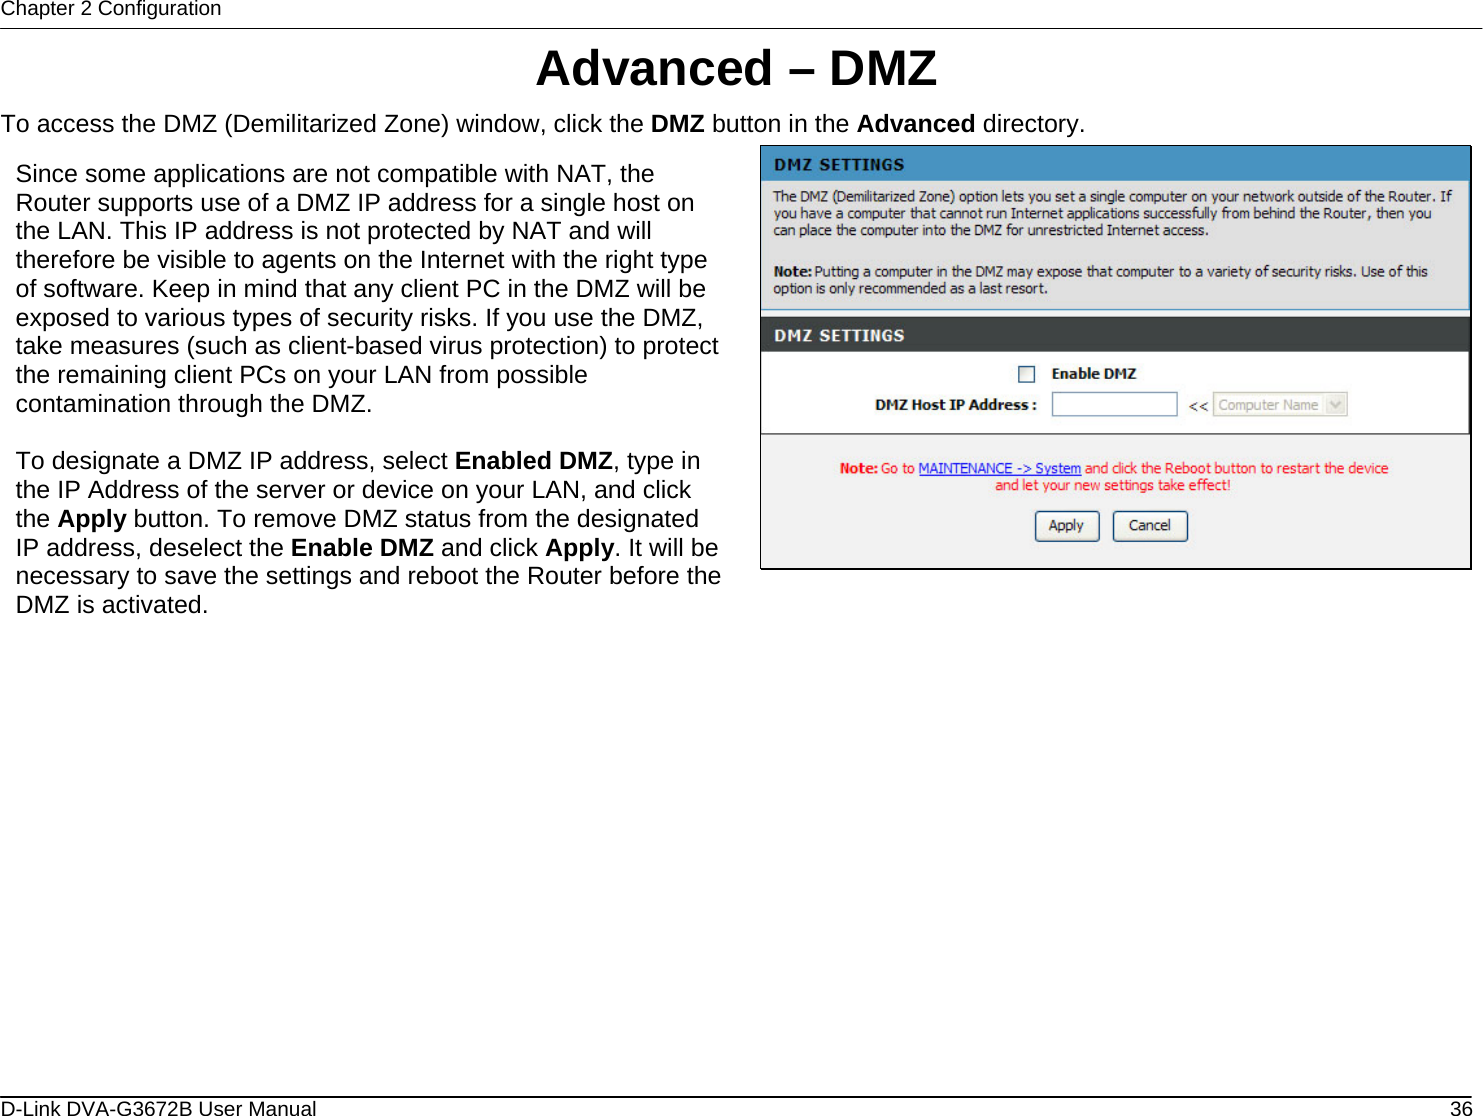 Chapter 2 Configuration Advanced – DMZ To access the DMZ (Demilitarized Zone) window, click the DMZ button in the Advanced directory.  Since some applications are not compatible with NAT, the Router supports use of a DMZ IP address for a single host on the LAN. This IP address is not protected by NAT and will therefore be visible to agents on the Internet with the right type of software. Keep in mind that any client PC in the DMZ will be exposed to various types of security risks. If you use the DMZ, take measures (such as client-based virus protection) to protect the remaining client PCs on your LAN from possible contamination through the DMZ.  To designate a DMZ IP address, select Enabled DMZ, type in the IP Address of the server or device on your LAN, and click the Apply button. To remove DMZ status from the designated IP address, deselect the Enable DMZ and click Apply. It will benecessary to save the settings and reboot the Router before the DMZ is activated.                   D-Link DVA-G3672B User Manual  36